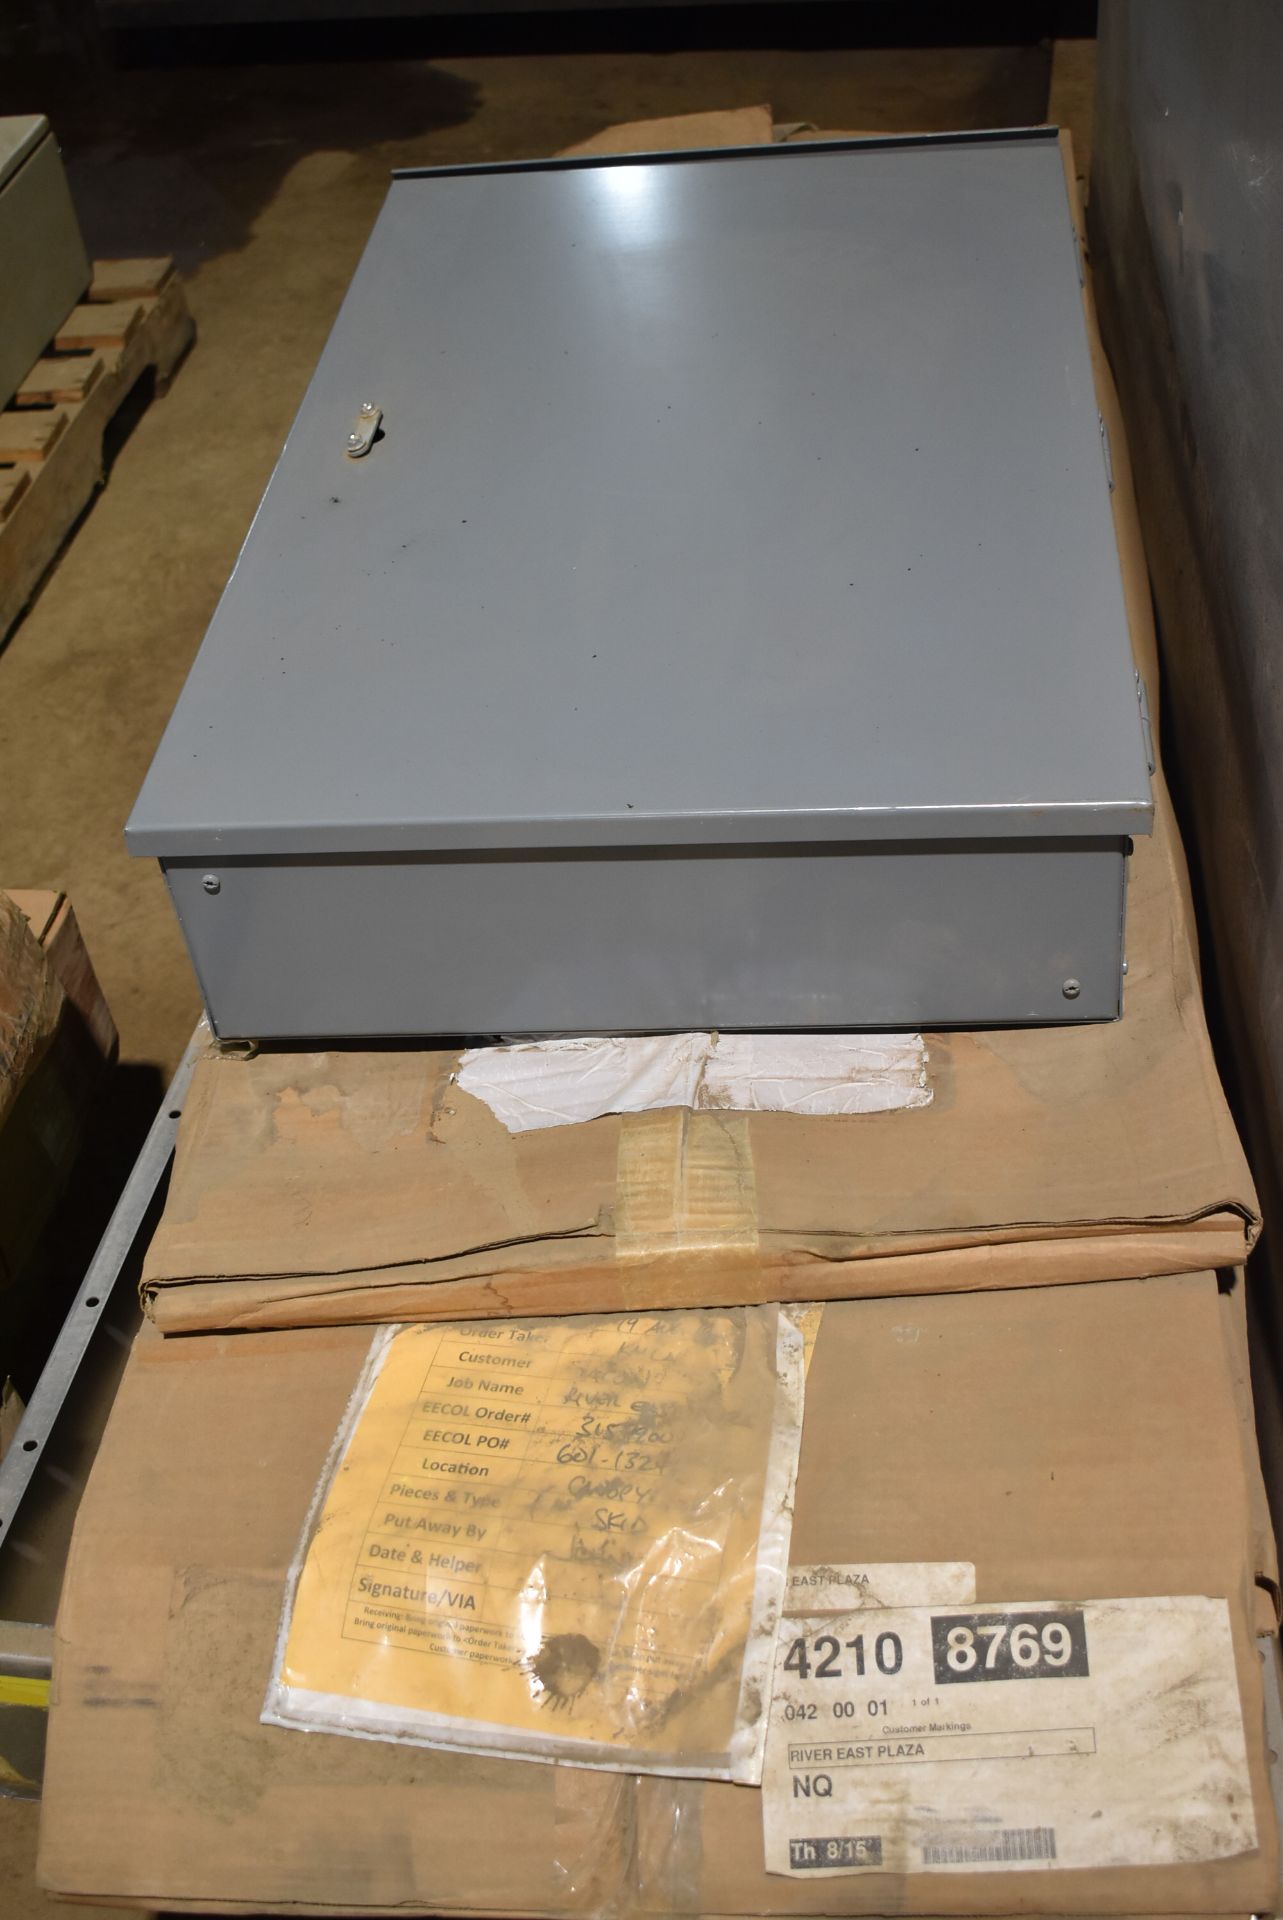 LOT/ (3) SKIDS WITH ELECTRICAL PANELS & BOXES, BREAKER PANEL COVERS, SEALED OVERHEAD LIGHT FIXTURES, - Image 4 of 12